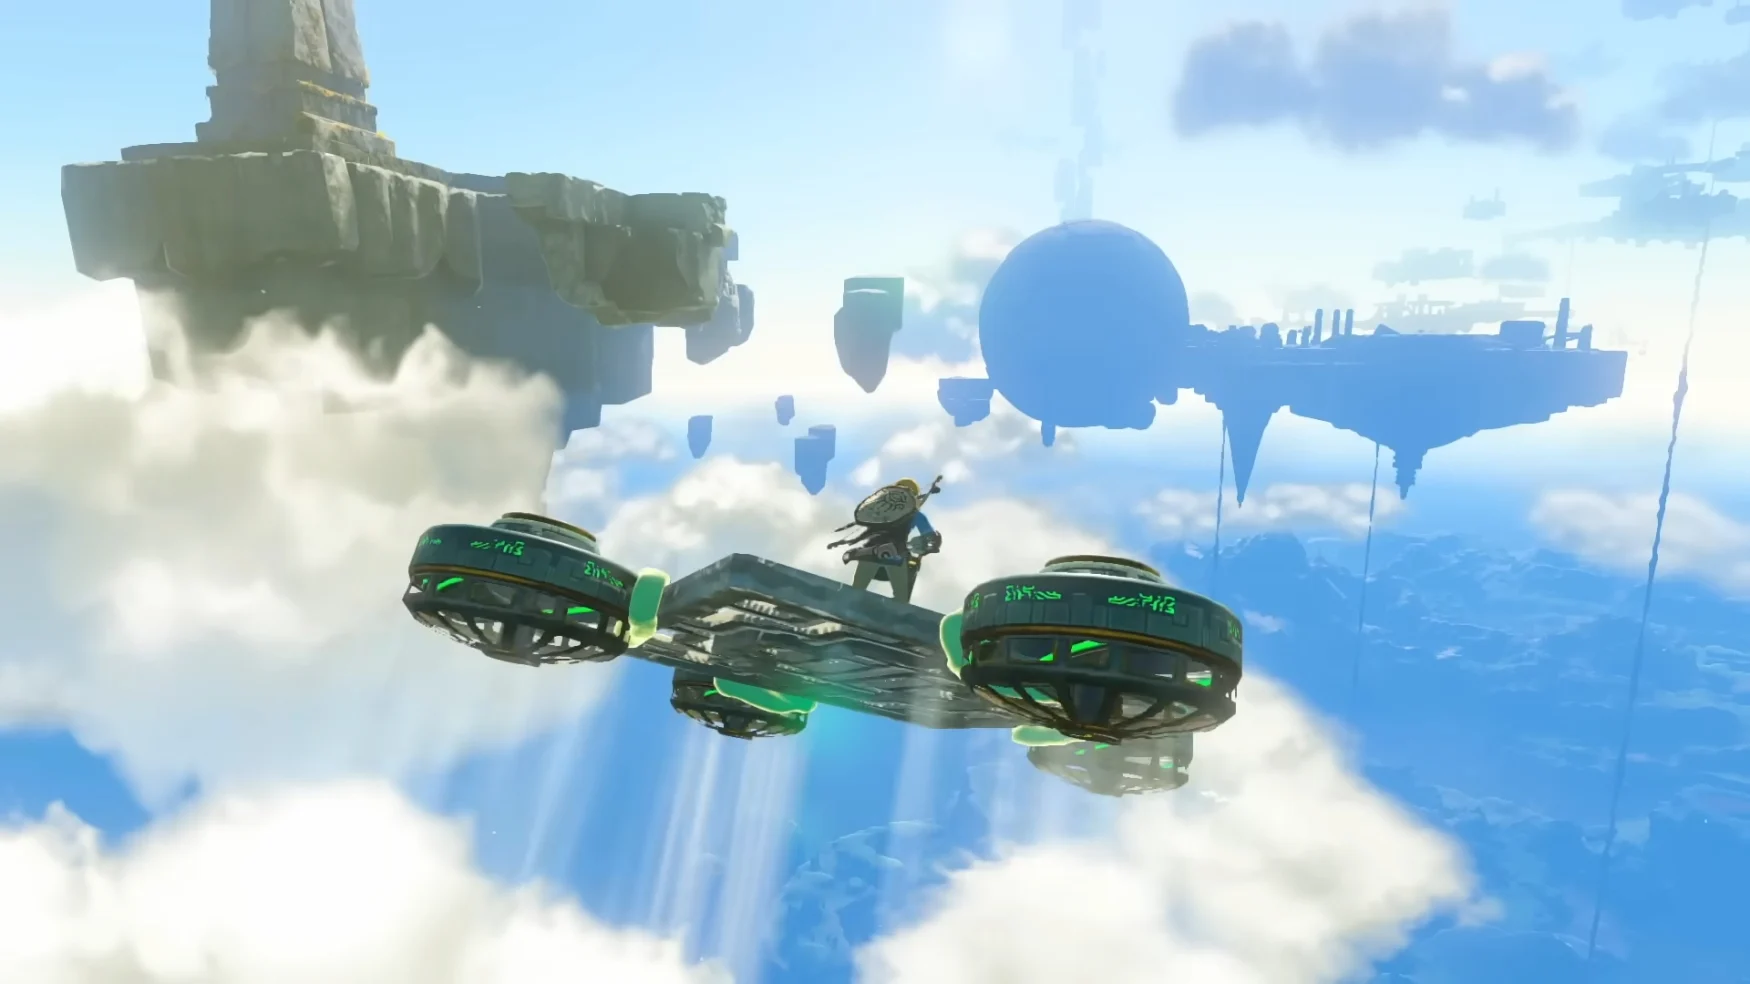 Screenshot from the trailer for “The Legend of Zelda: Tears of the Kingdom.” Link rides in the clouds on a hovercraft as floating islands appear in the distance.